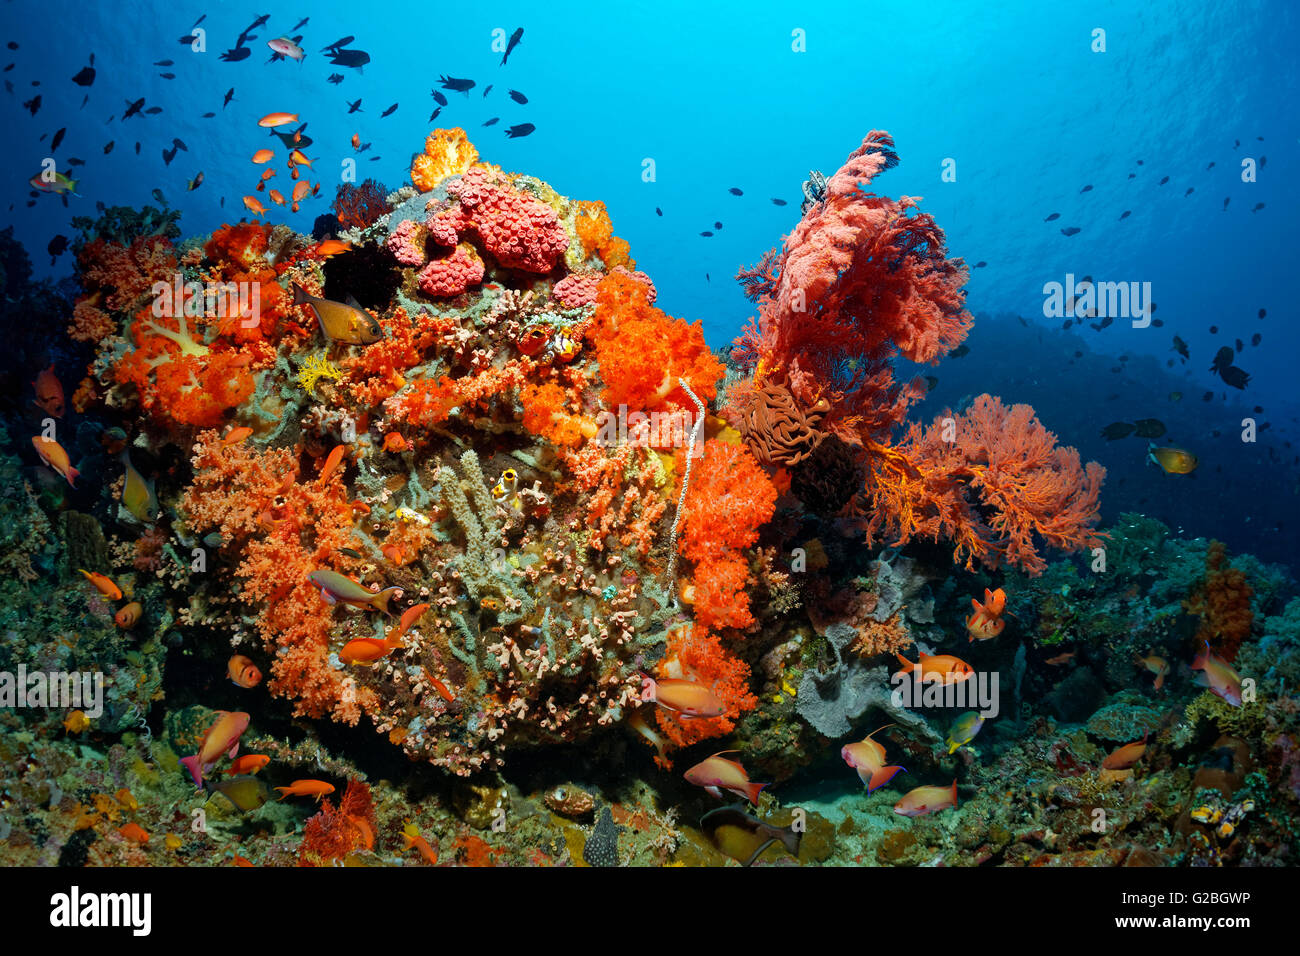 Coral colony, fish, invertebrates, stony coral, soft coral, gorgonian, sponge, sea squirt, Great Barrier Reef, Queensland Stock Photo